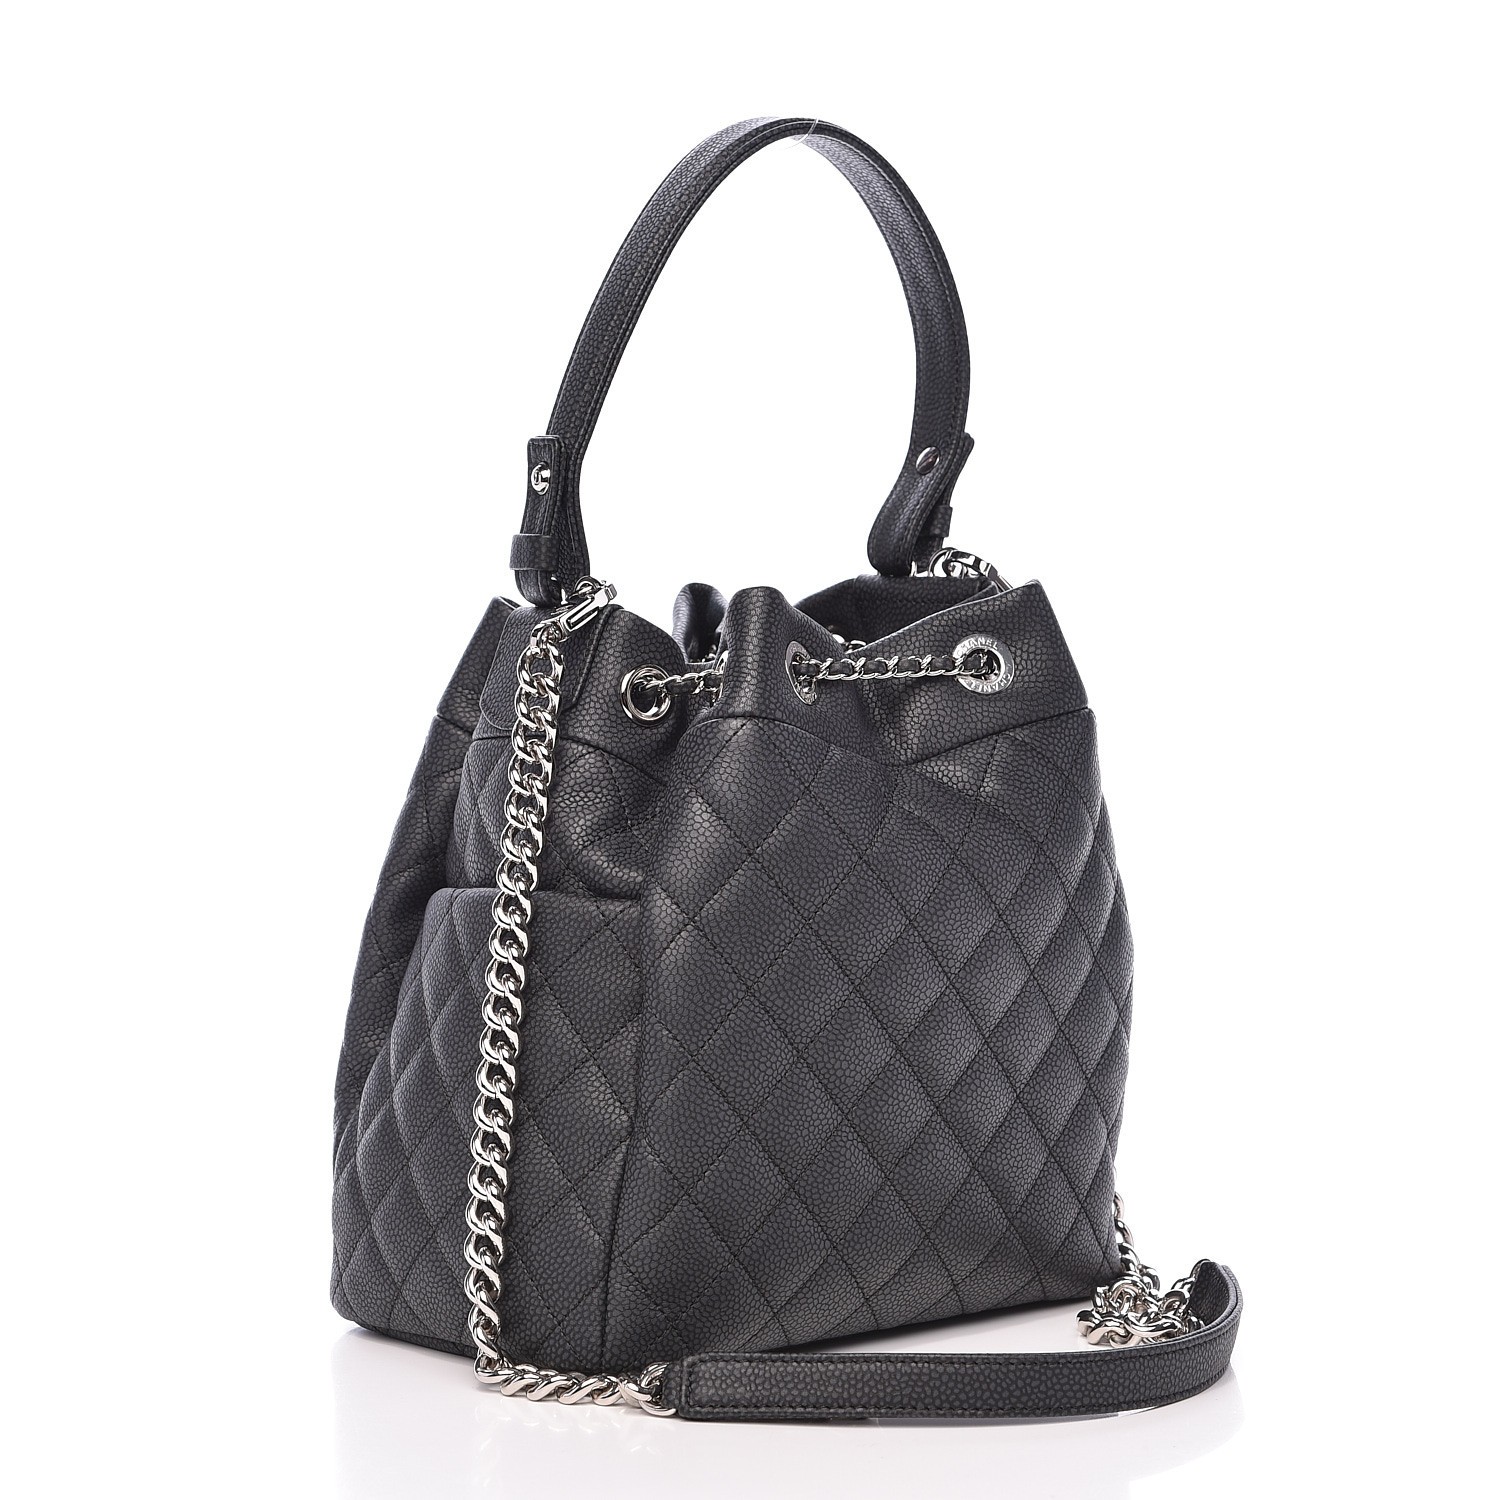 CHANEL Grained Calfskin Quilted Small Chain Bucket Bag Black 514023